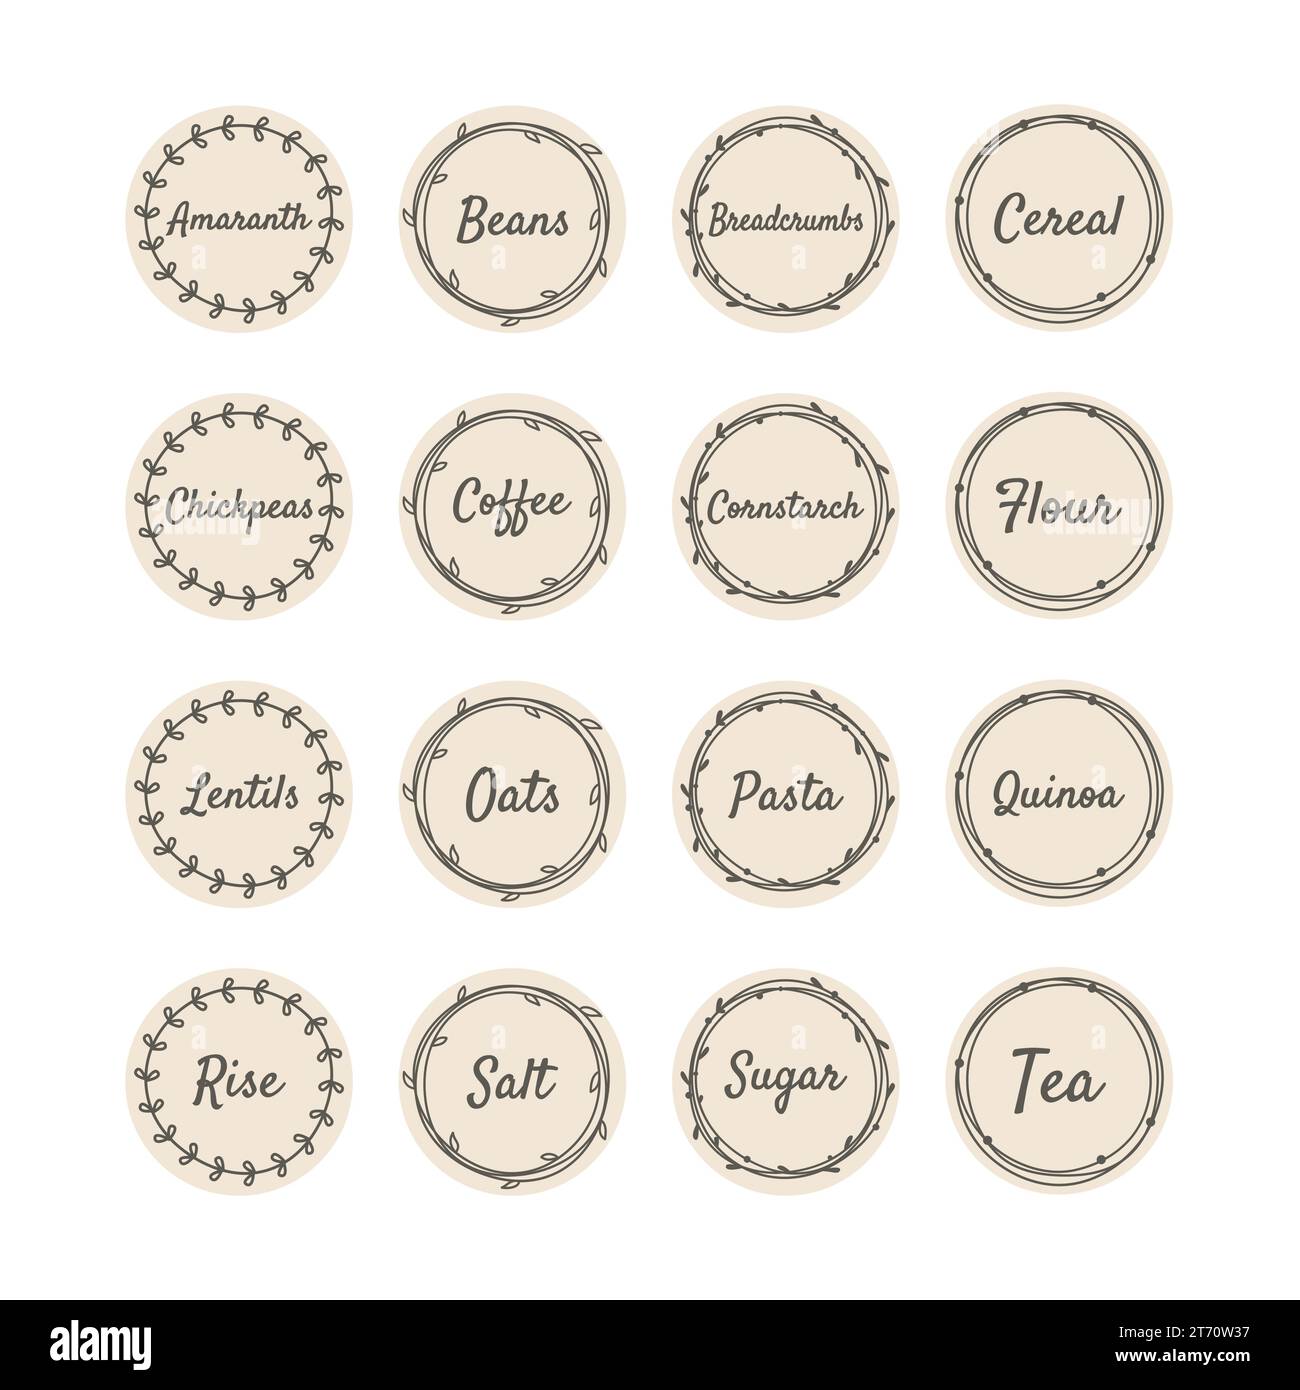 Legumes and pulses or cereal food label set for kitchen jars. Beans, Coffee and Pasta jar labels. Rice, Quinoa and Bread crumbs text in vintage frame. Stock Vector